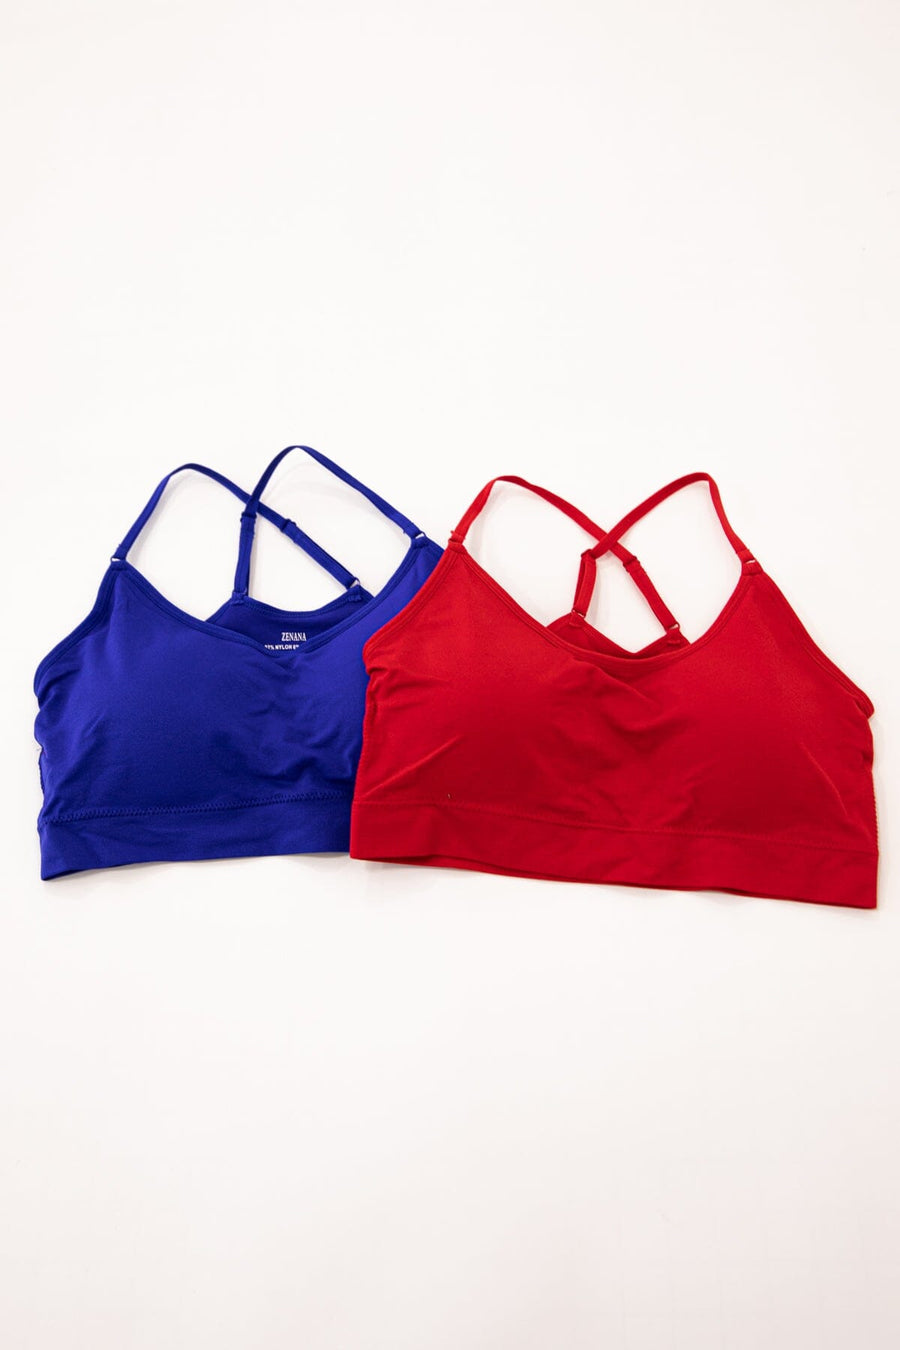 Cobalt and Red Padded Bralette Bundle - Filly Flair